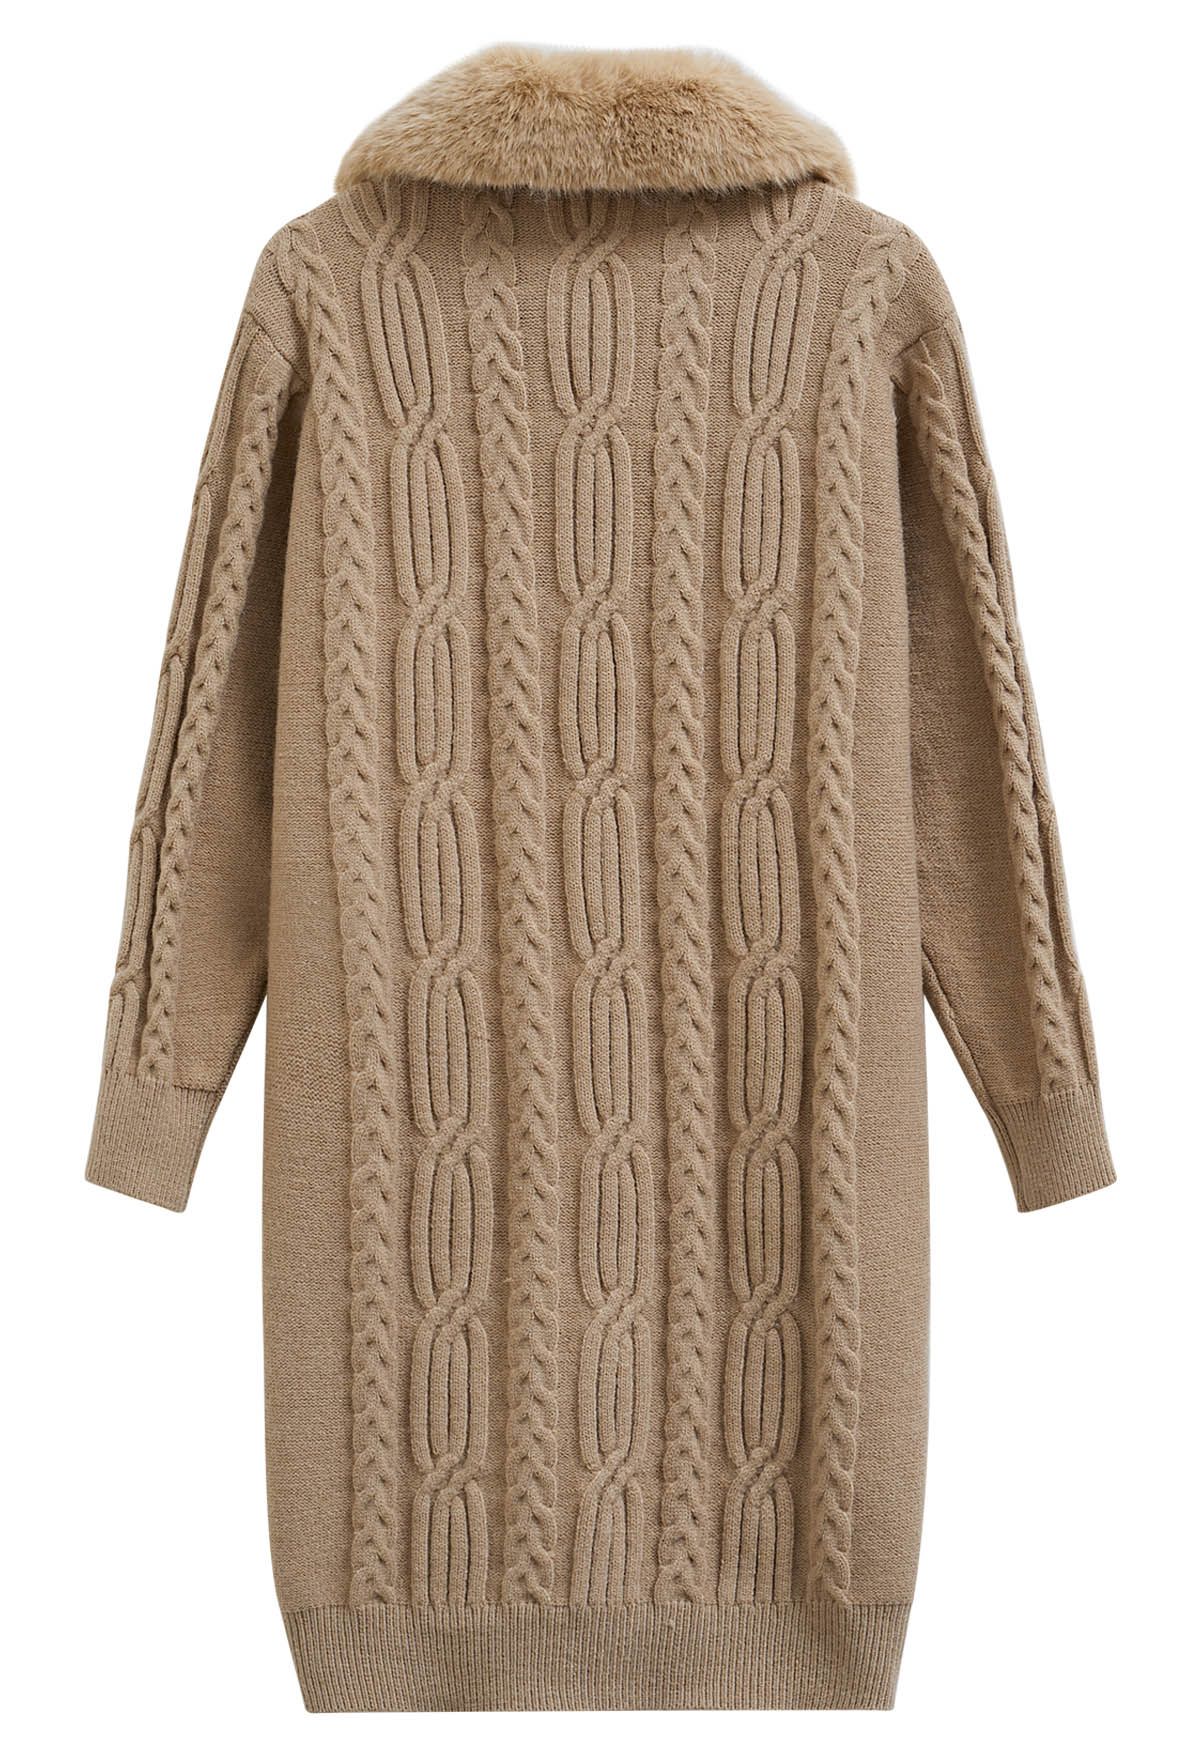 Faux Fur Collar Cable Knit Buttoned Longline Cardigan in Camel